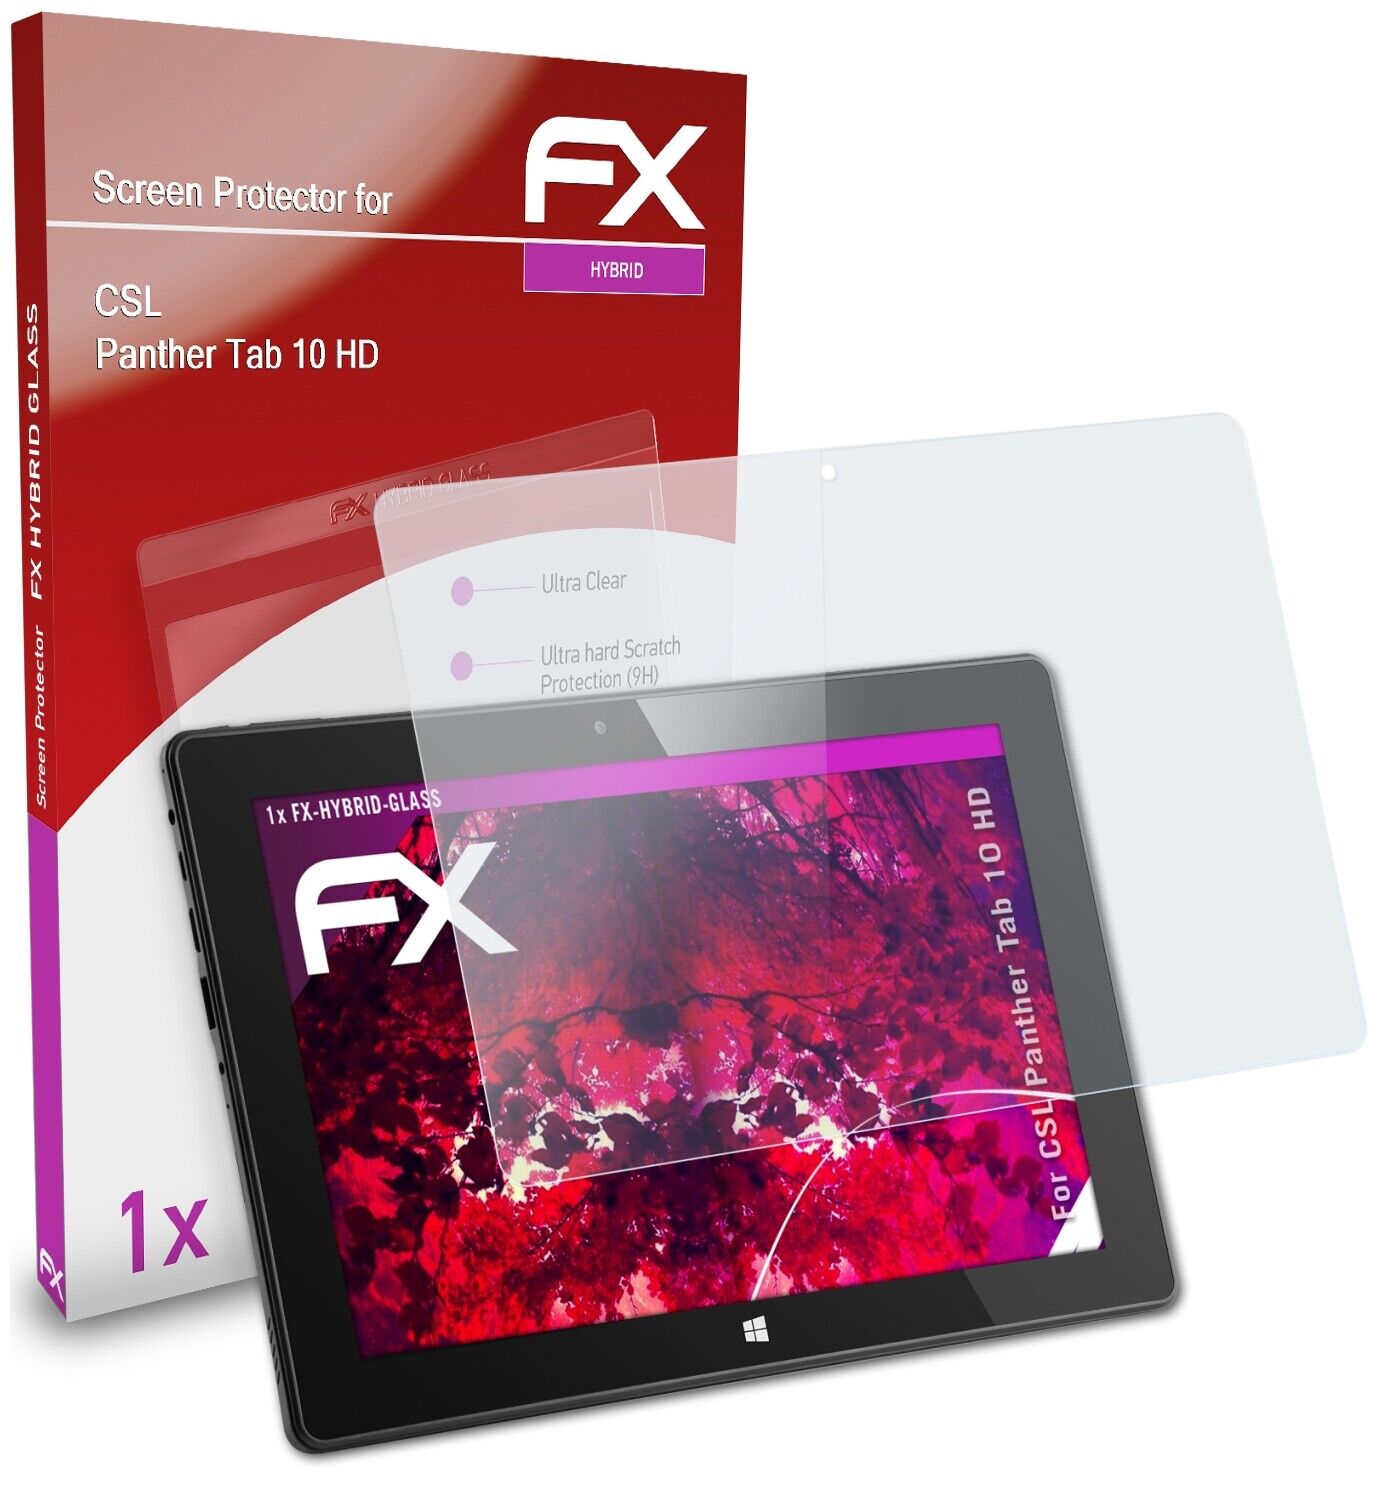 atFoliX Glass Protector for CSL Panther Tab 10 HD 9H Hybrid-Glass